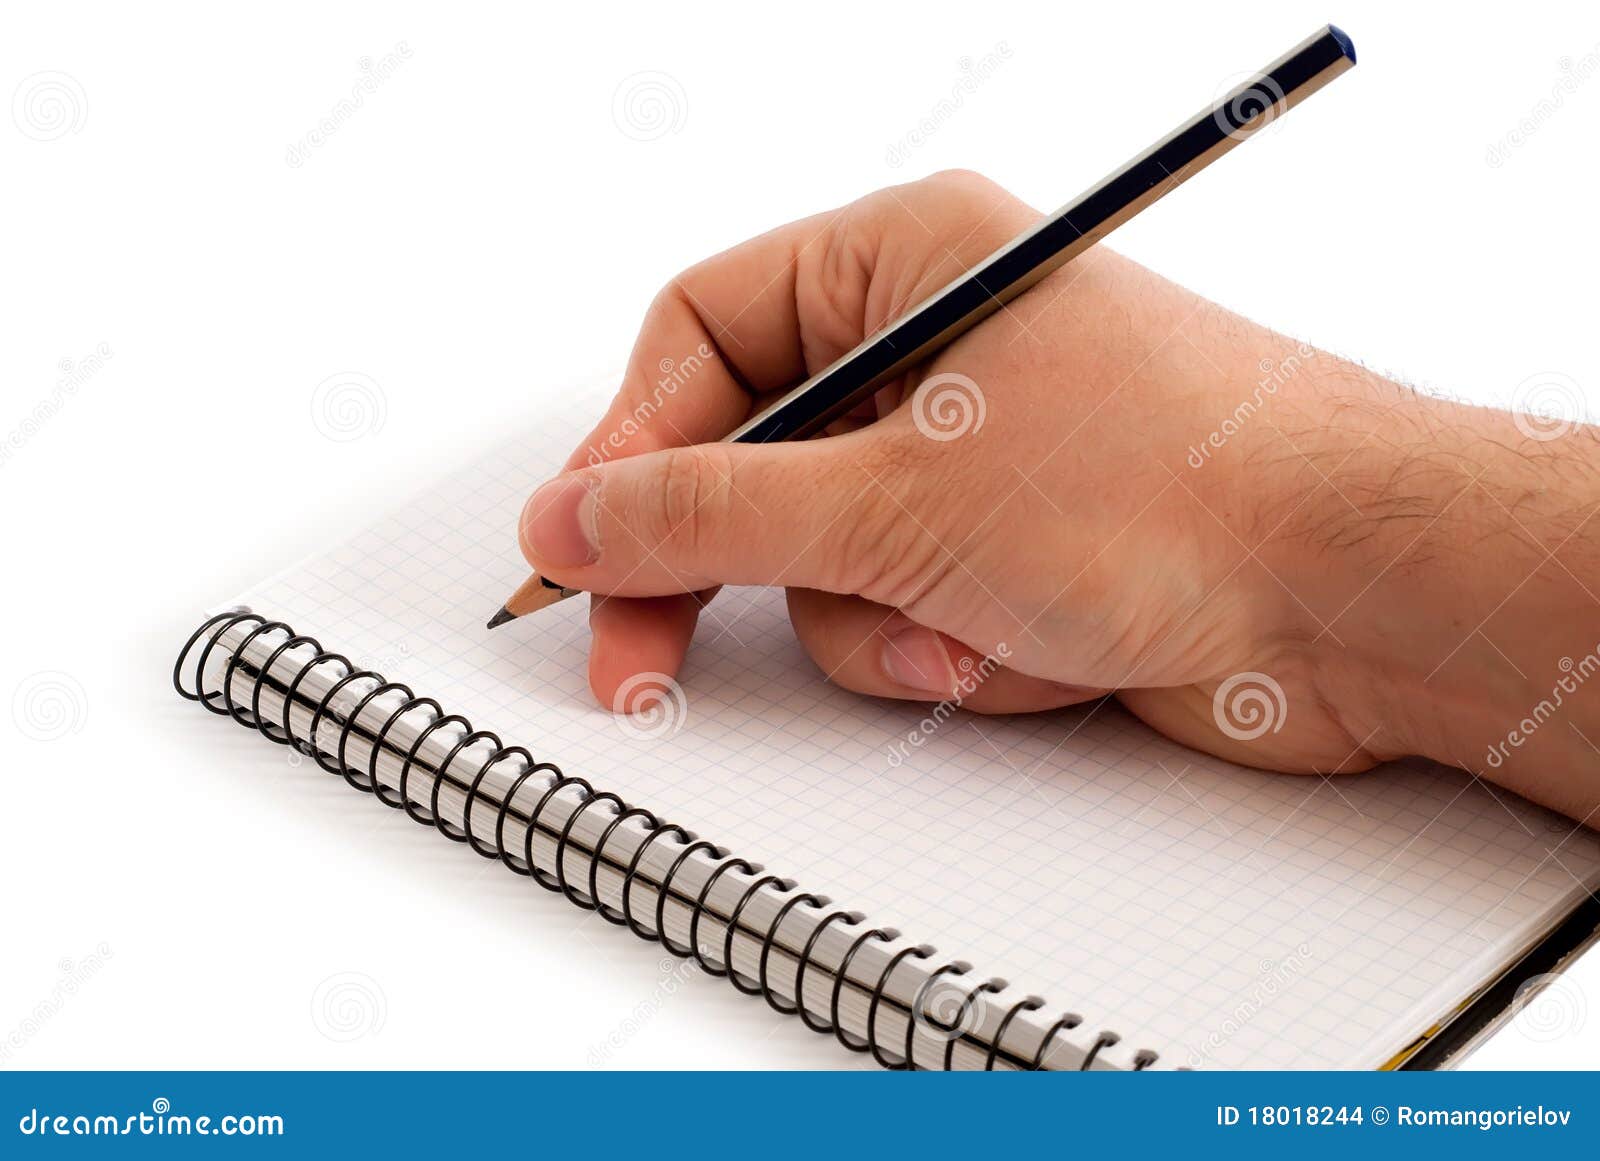 Hand with pencil stock photo. Image of empty, document - 18018244